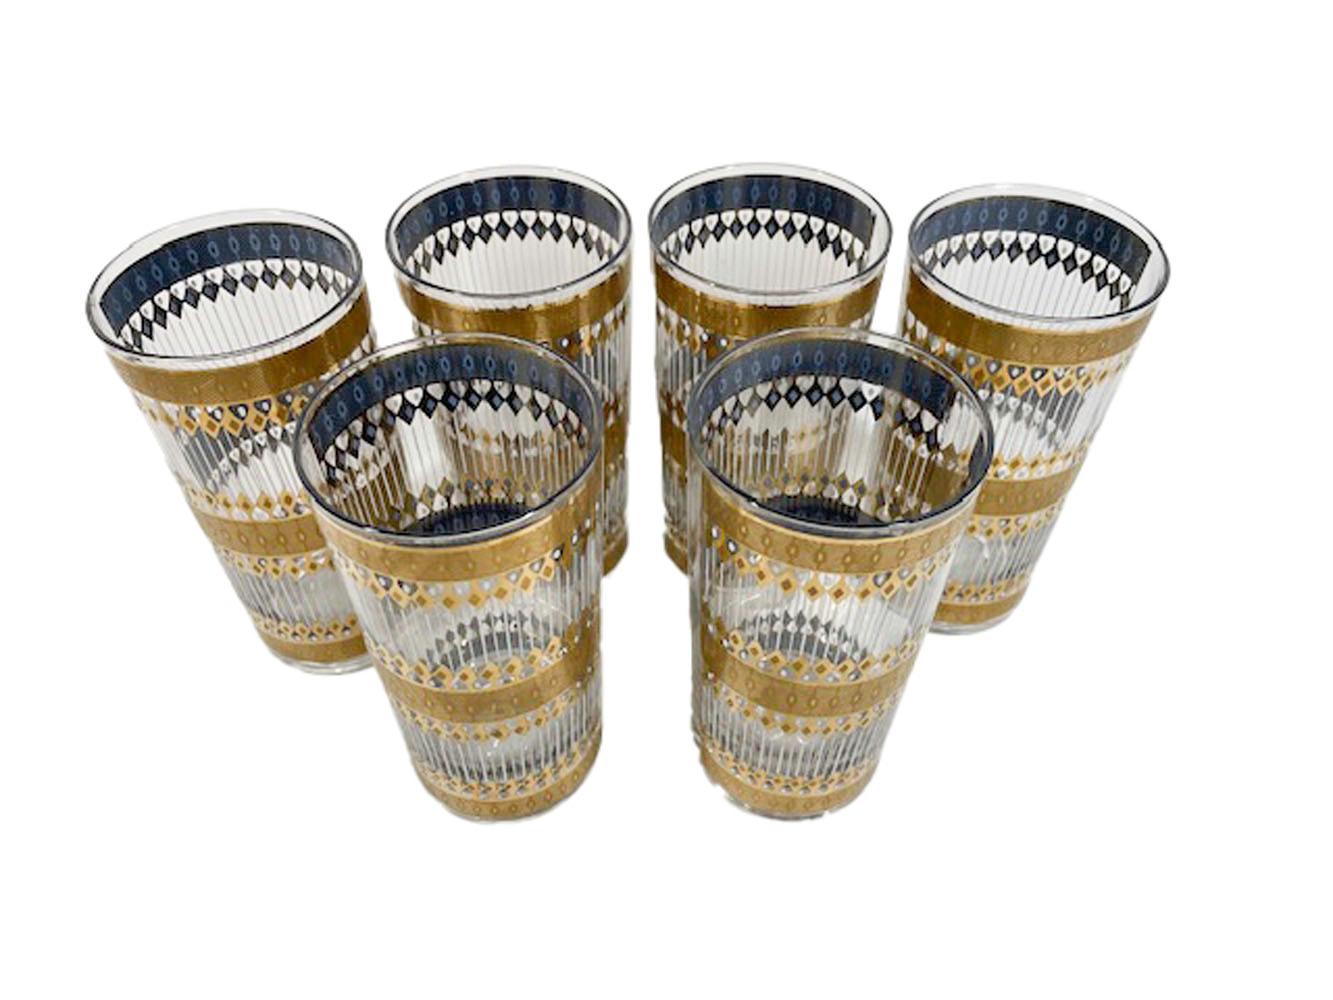 Six Mid-Century Modern highball glasses in the Barcelona pattern by Culver, LTD. 22 Karat gold with embossed geometric patterns over blue enamel, the blue with the same geometric patterns is visible only on the glass's interiors.